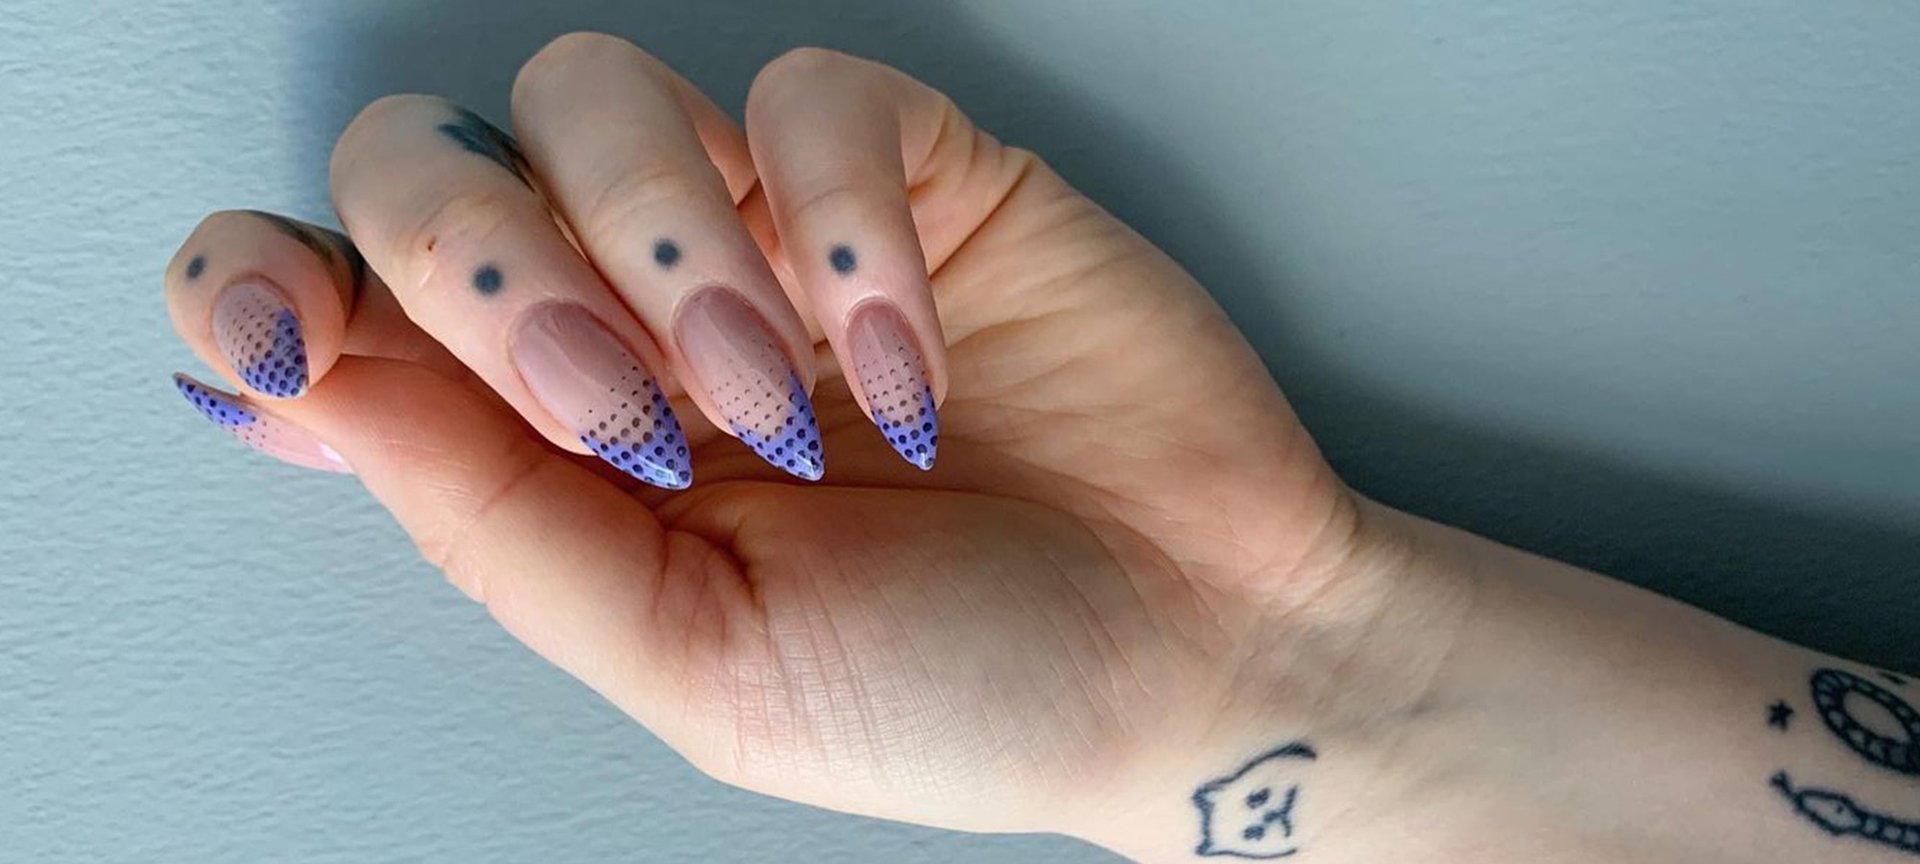 Details more than 141 aesthetic nail designs best